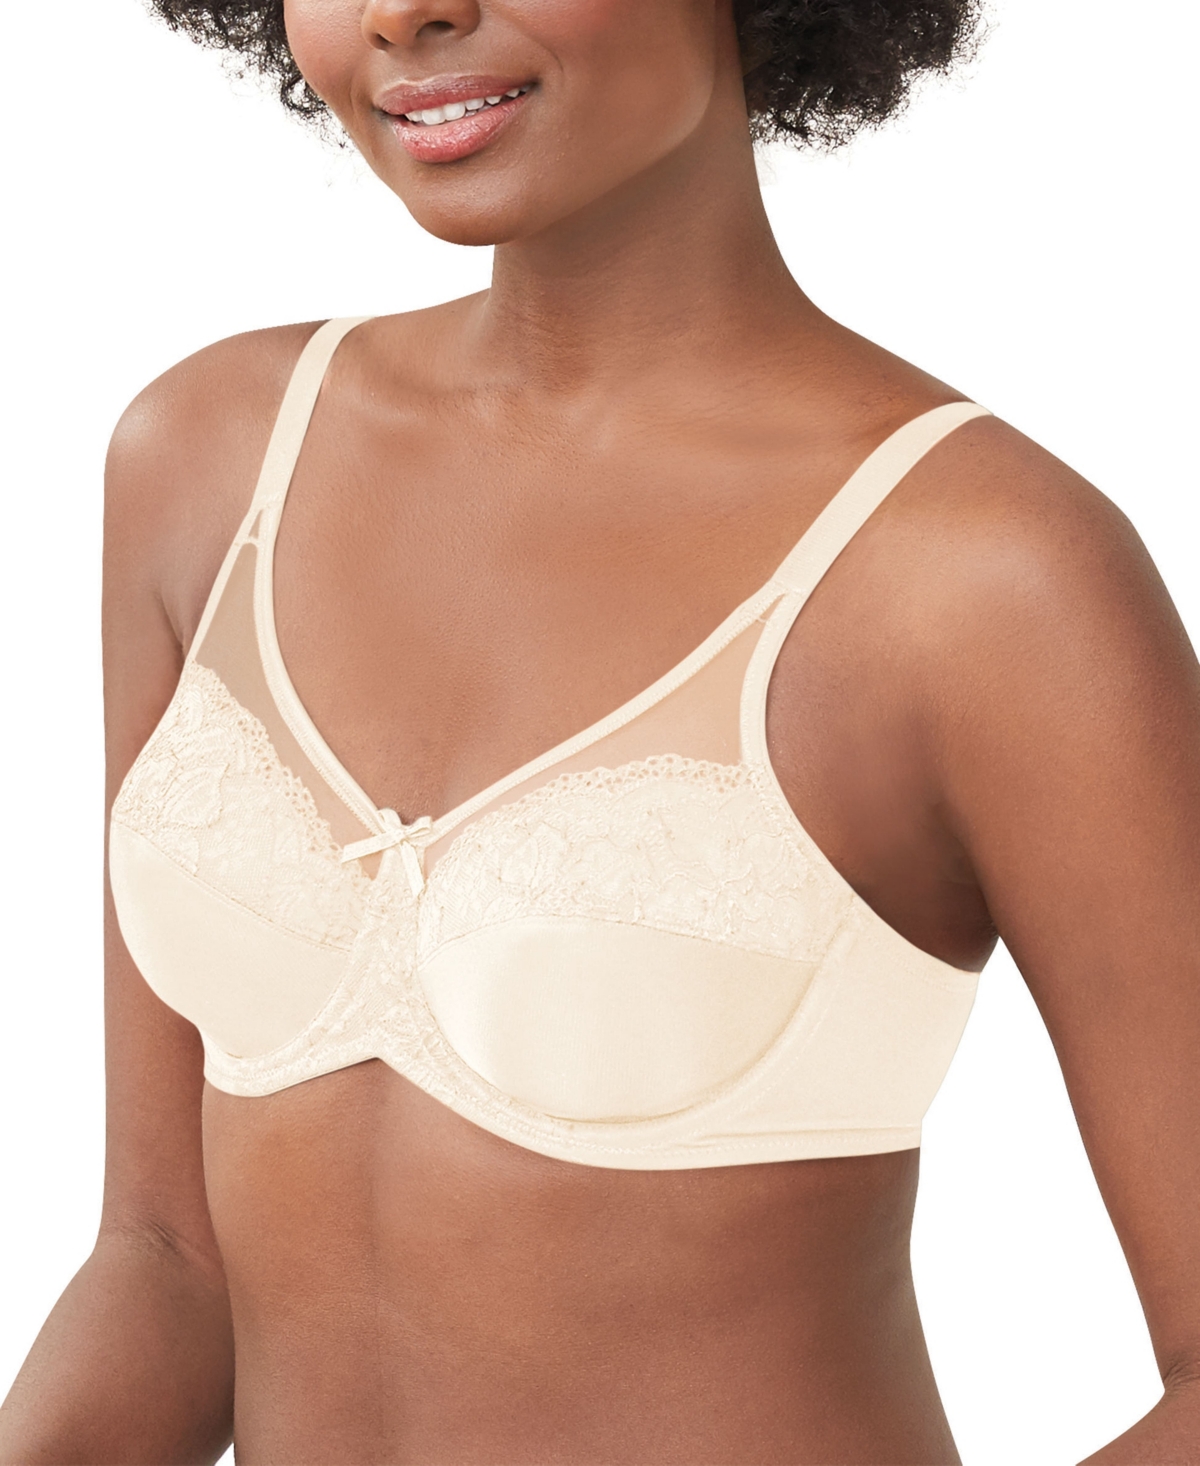 UPC 192503129842 product image for Lilyette by Bali Minimizer Ultimate Smoothing Underwire Bra LY0444 | upcitemdb.com